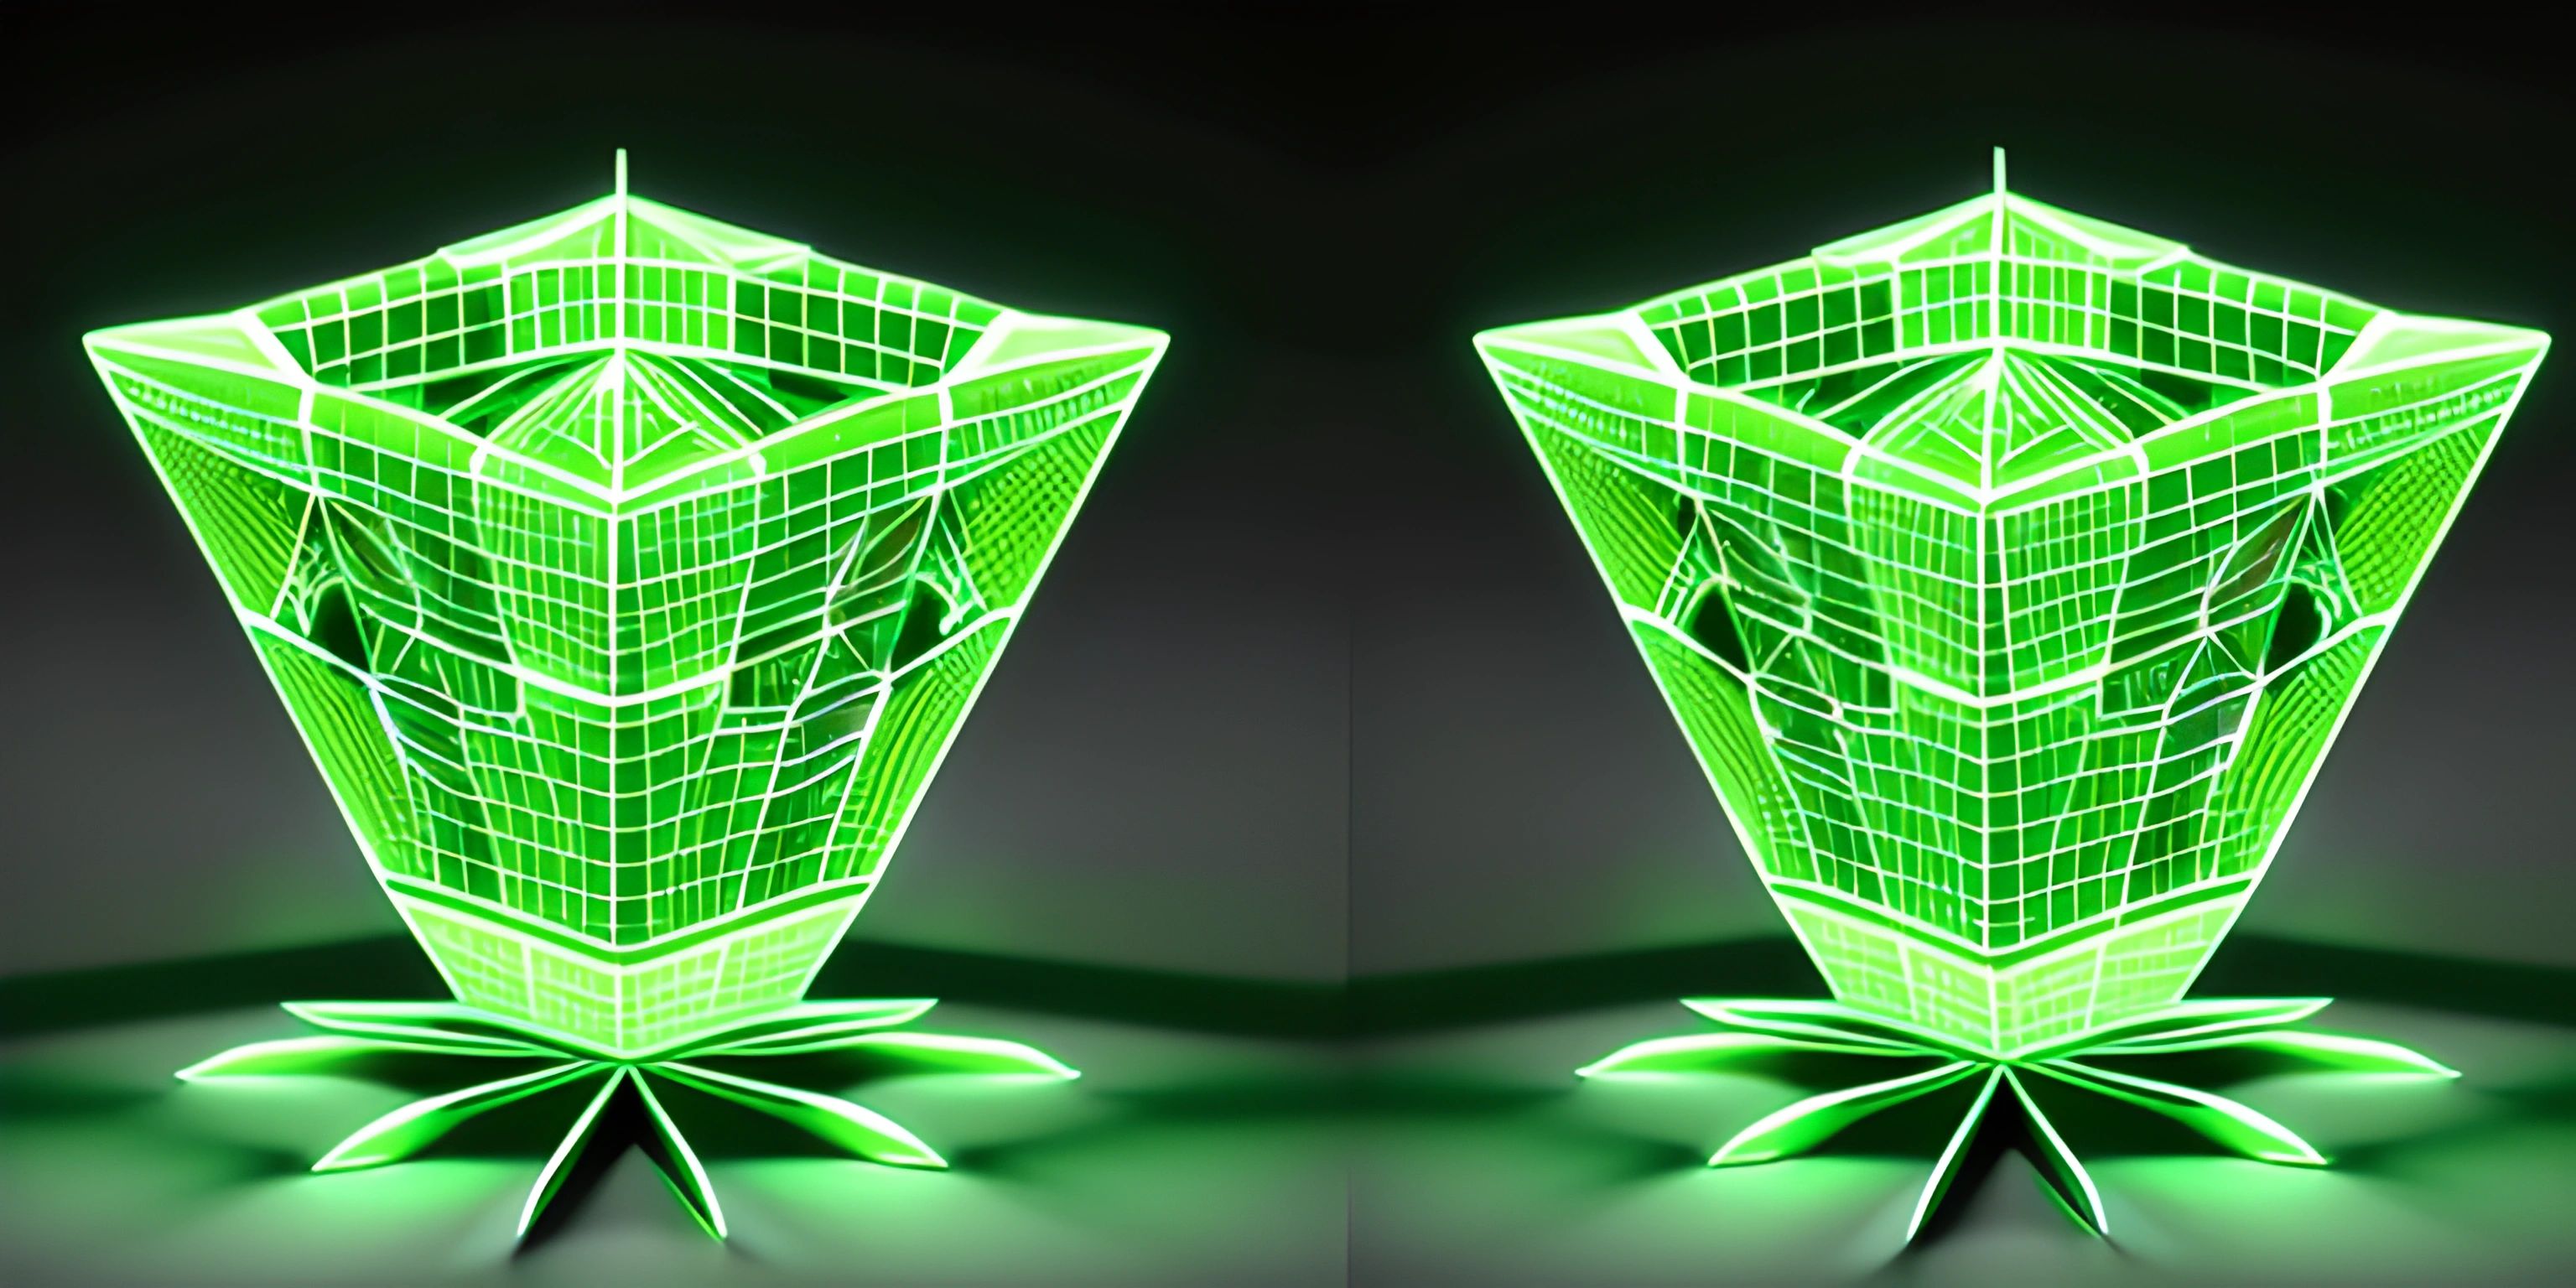 a lamp that glows green is pictured in two separate images that are both showing the same size